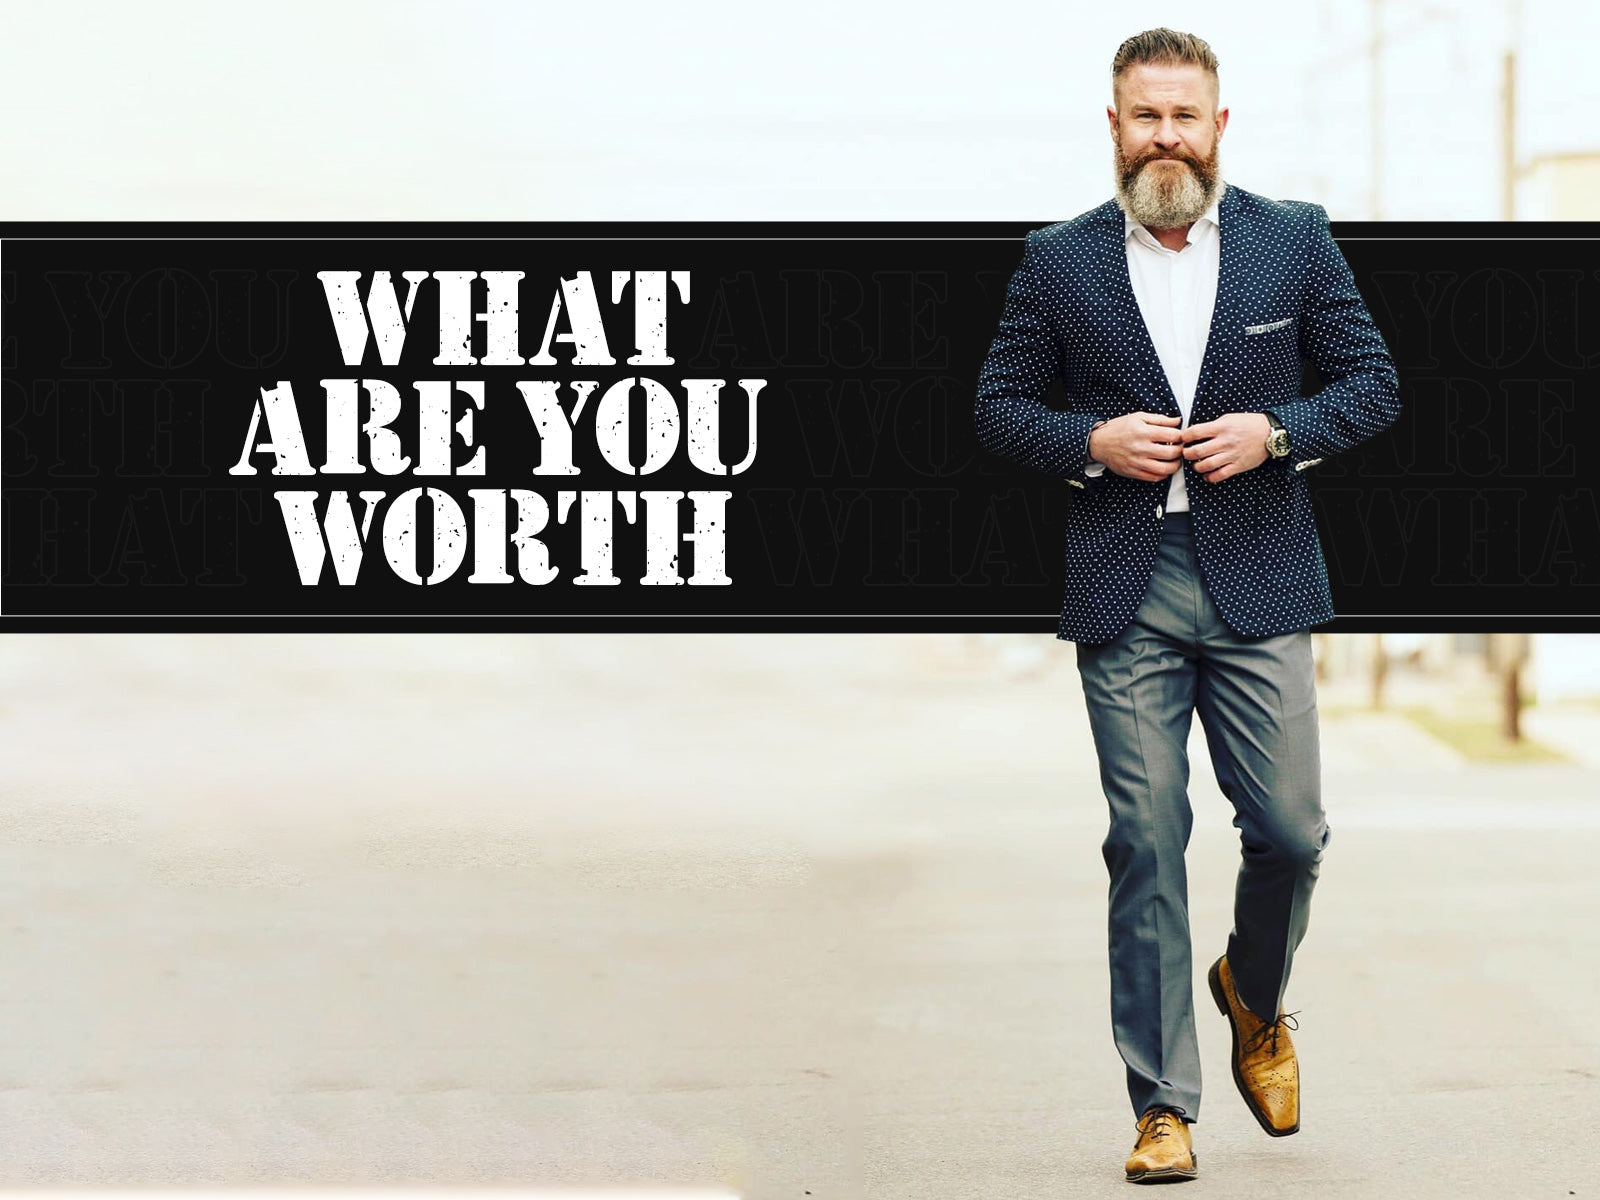 What Are You Worth?